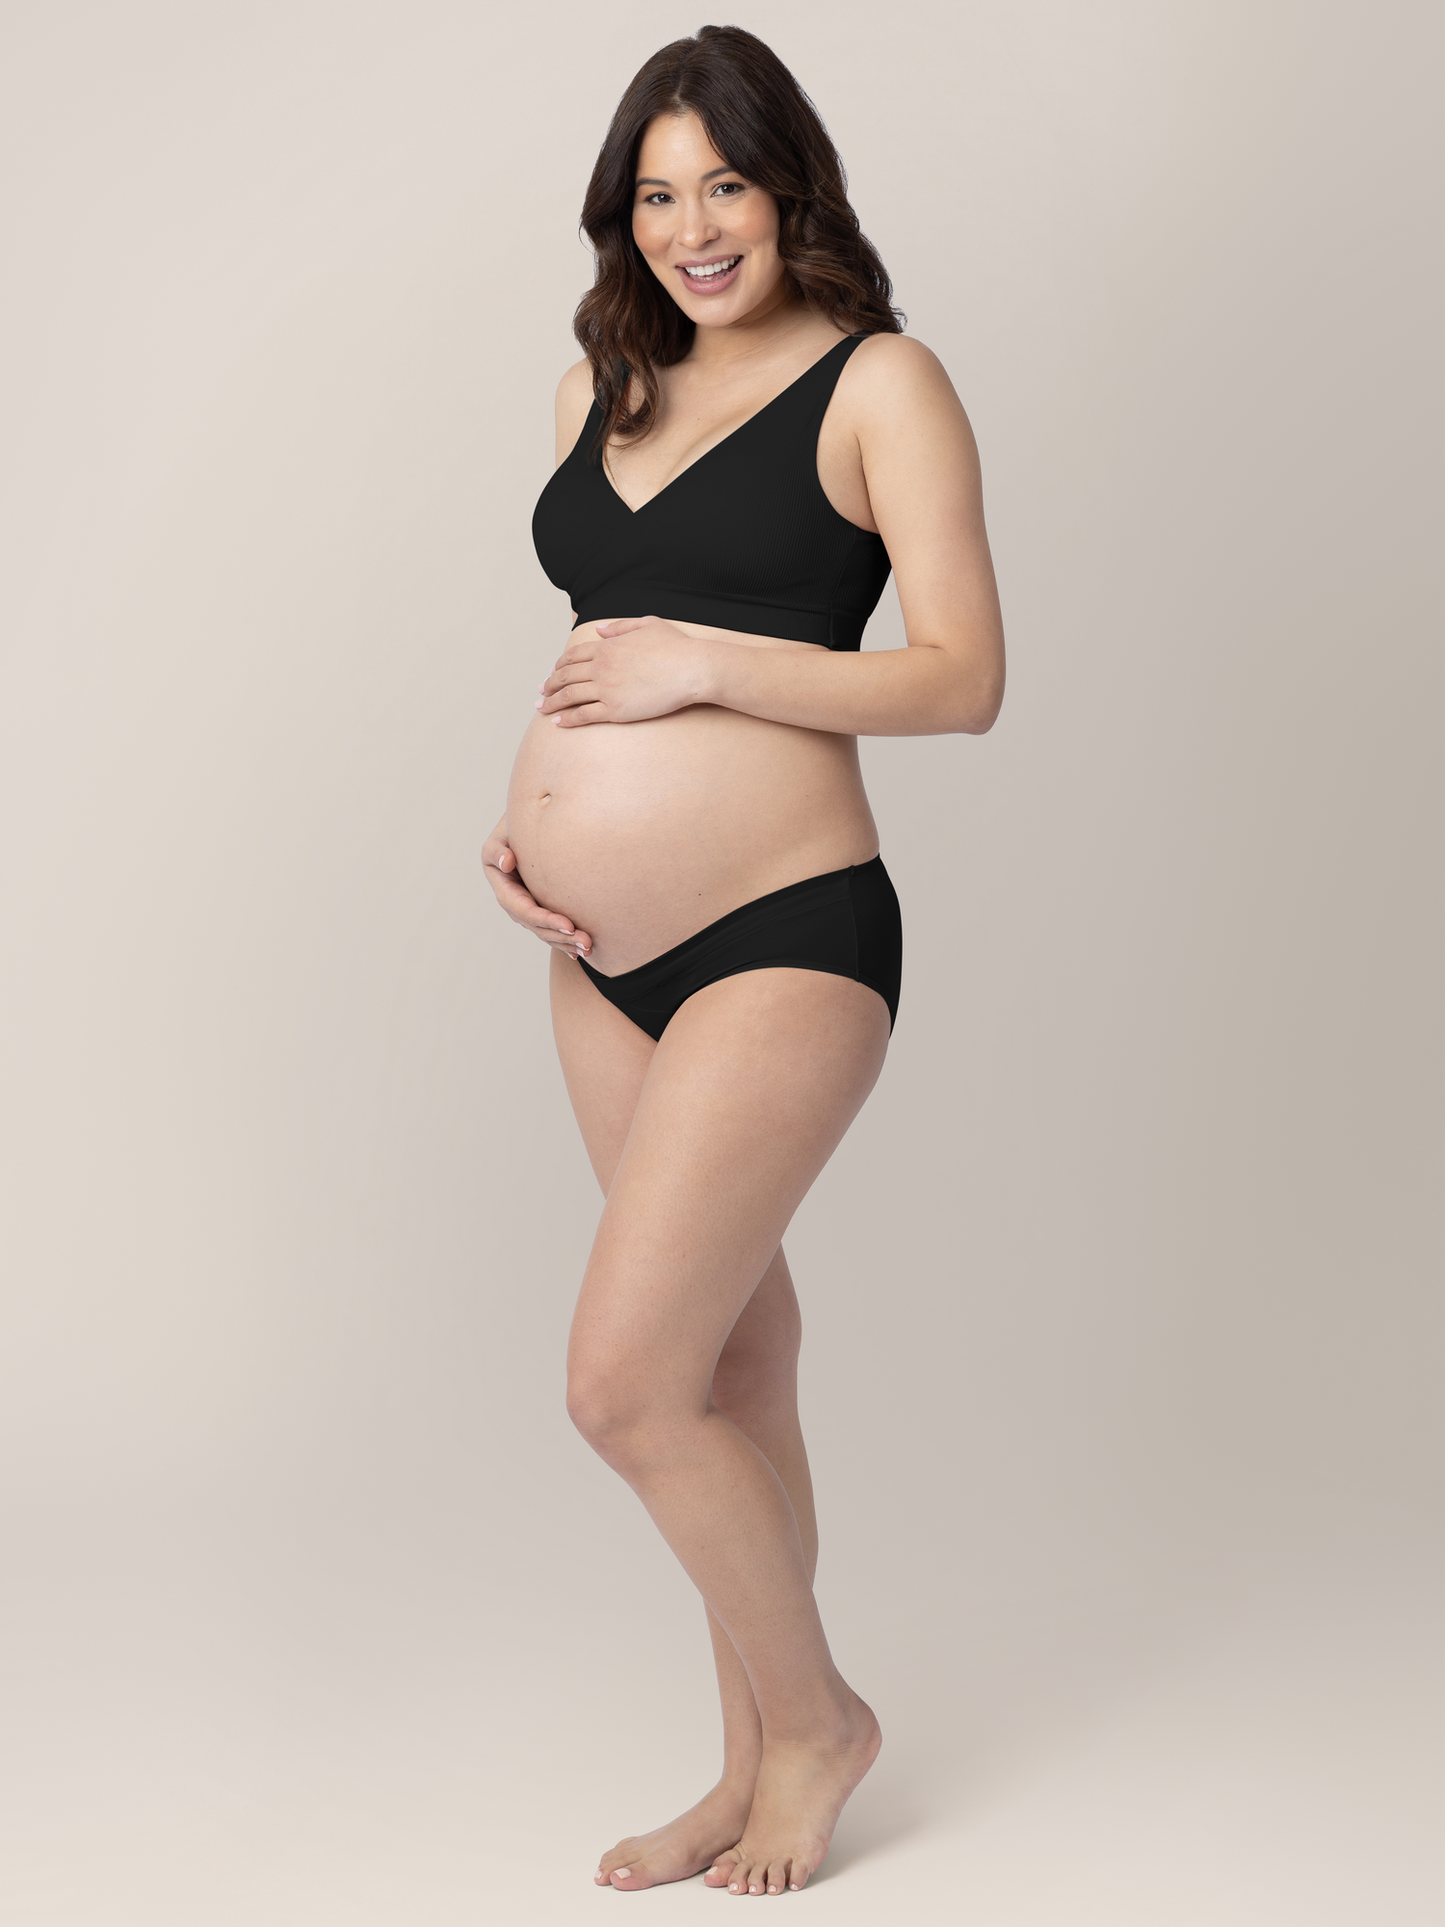 Pregnant model wearing the Under-the-Bump Bikini Underwear in Neutrals with her hands on her stomach. @model_info:Vanessa is wearing a Small.